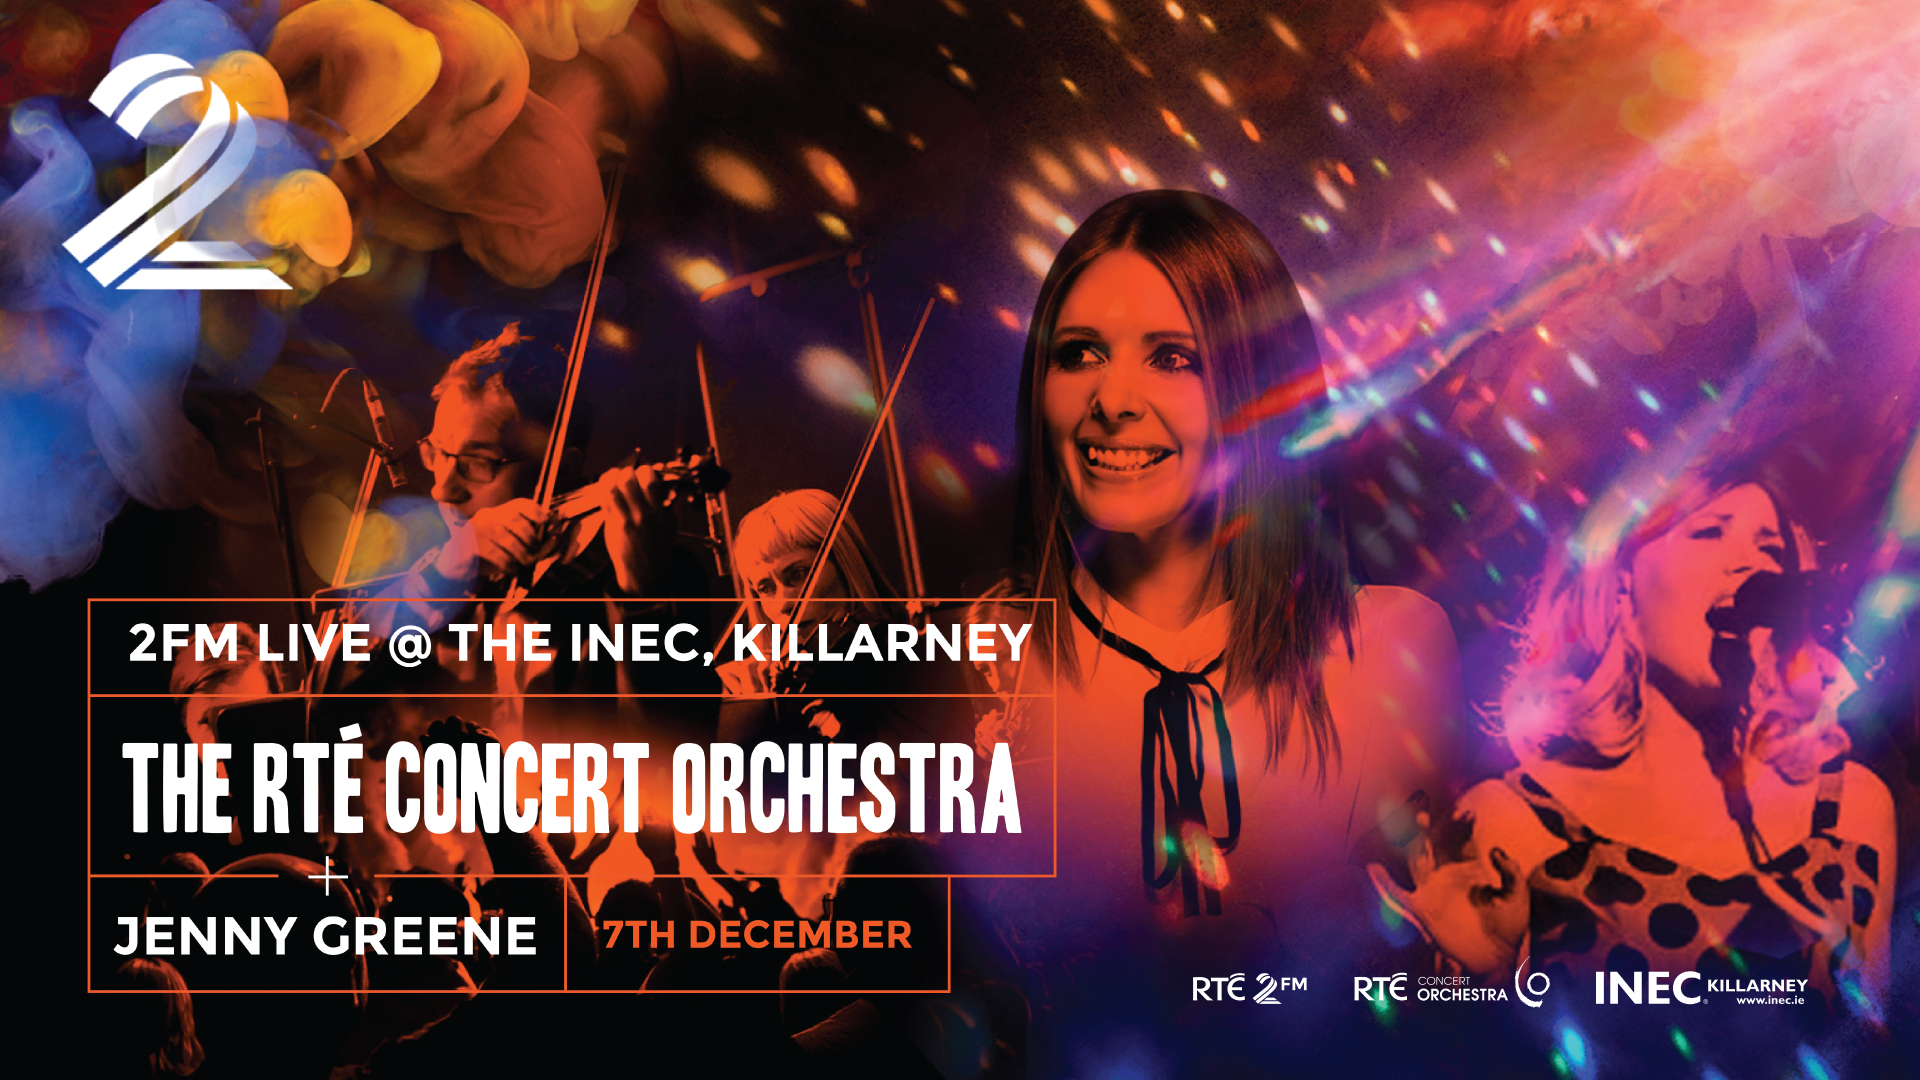 2FM LIVE WITH JENNY GREENE AND THE RTÉ CONCERT ORCHESTRA RETURNS TO THE INEC KILLARNEY THIS DECEMBER